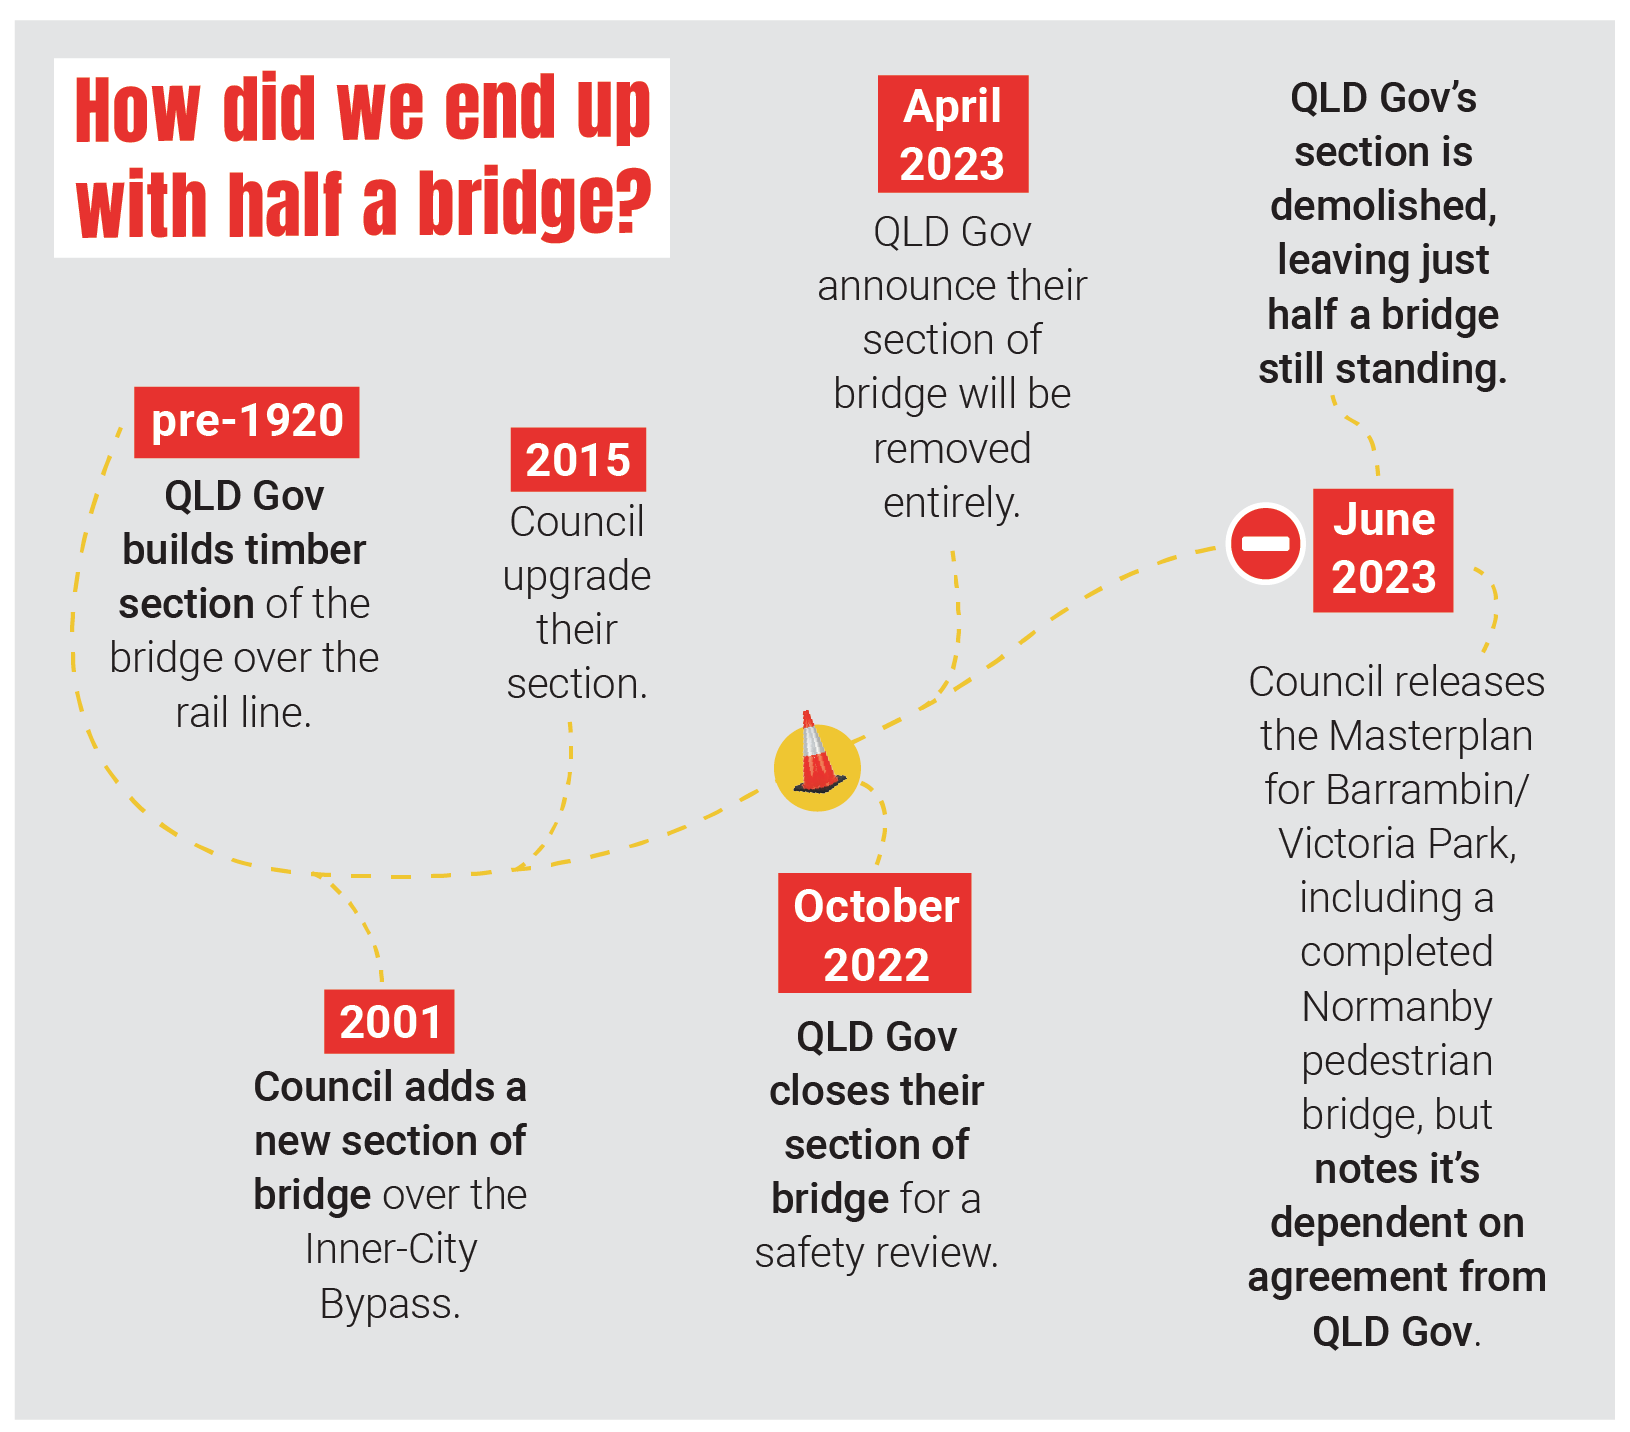 Graphic - How did we end up with half a bridge? pre-1920 OLD Gov | builds timber section of the bridge over the rail line; 2001 Council adds a new section of bridge over the Inner-Citv Bypass; 2015 Council upgrade their section; October 2022 OLD Gov closes their section of bridge for a safety review; April 2023 OLD Gov announce their section of bridge will be removed entirely; June 2023 Council releases the Masterplan for Barrambin/ Victoria Park, includina a completed Normanby pedestrian bridge, but notes it's dependent on agreement from QLD Gov; OLD Gov's section is demolished, leaving just half a bridge still standing.